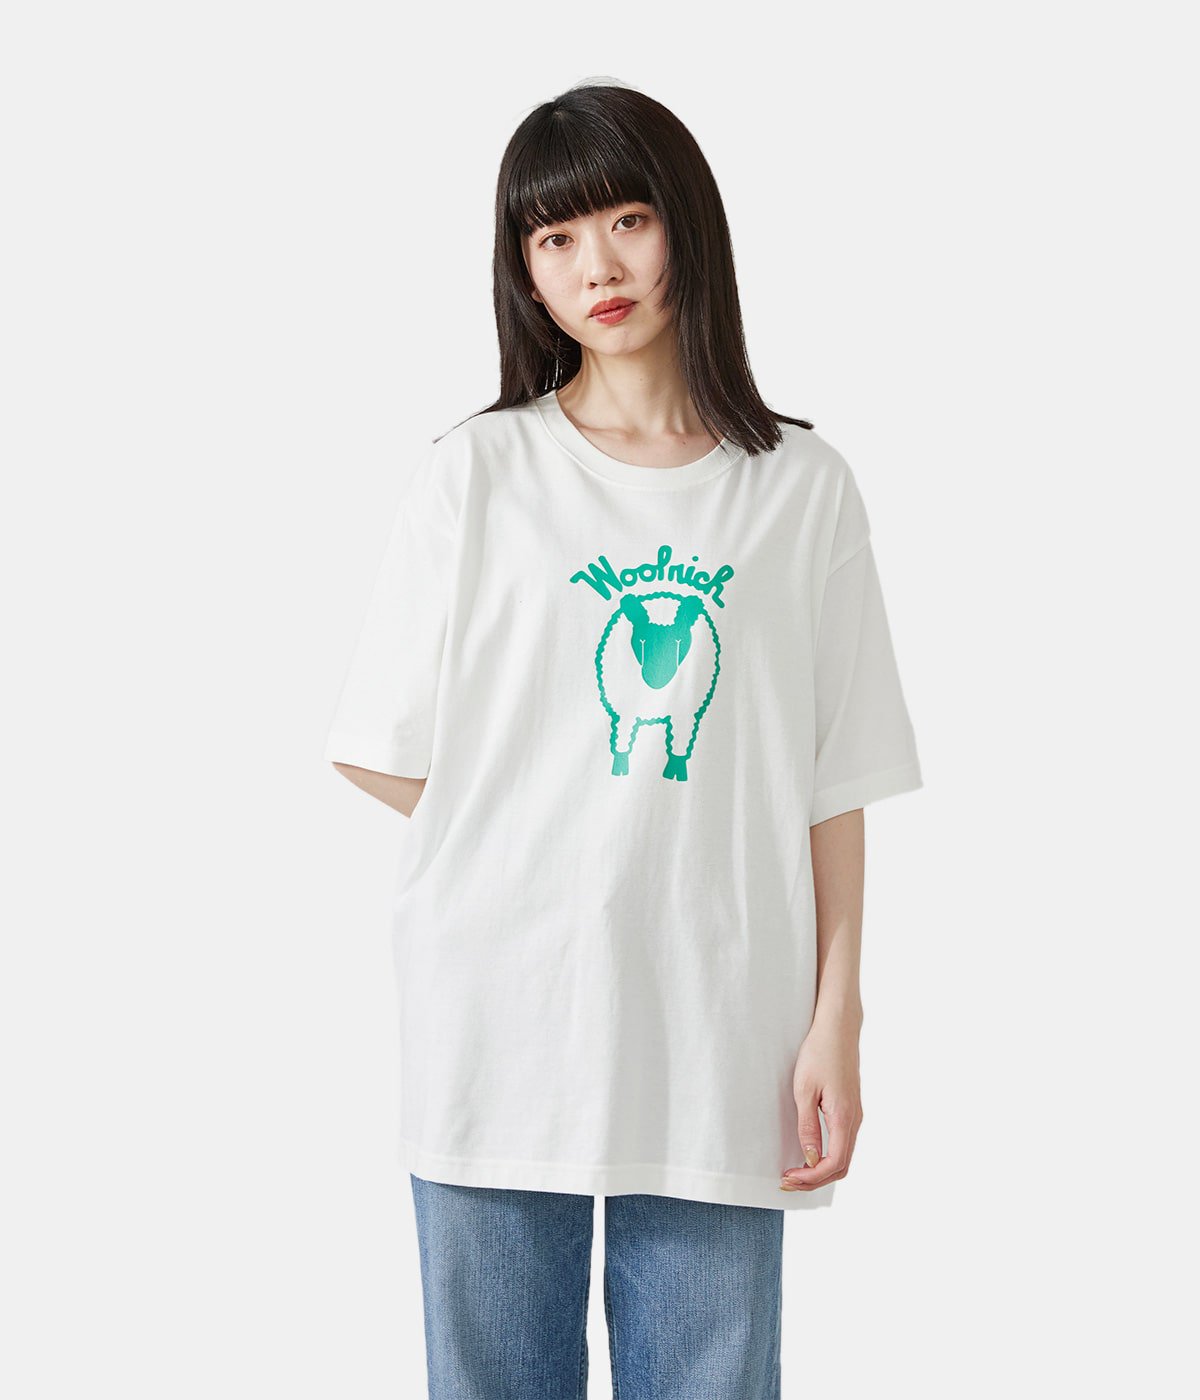 WOOLRICH(ウールリッチ) SHEEP GRAPHIC TEE / トップス カットソー半袖 